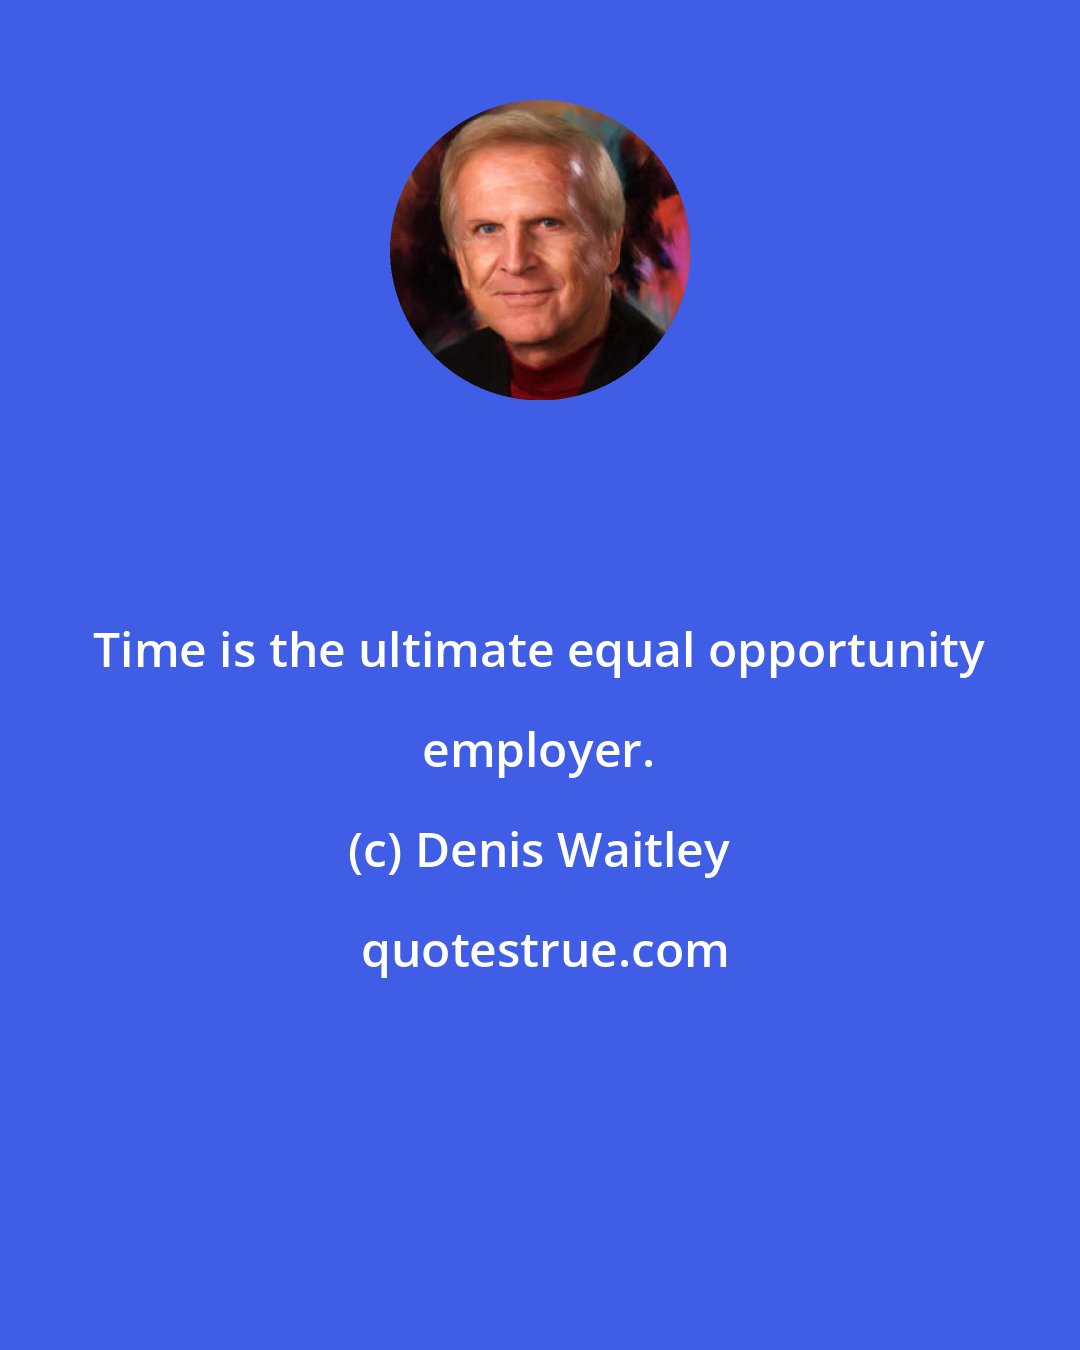 Denis Waitley: Time is the ultimate equal opportunity employer.